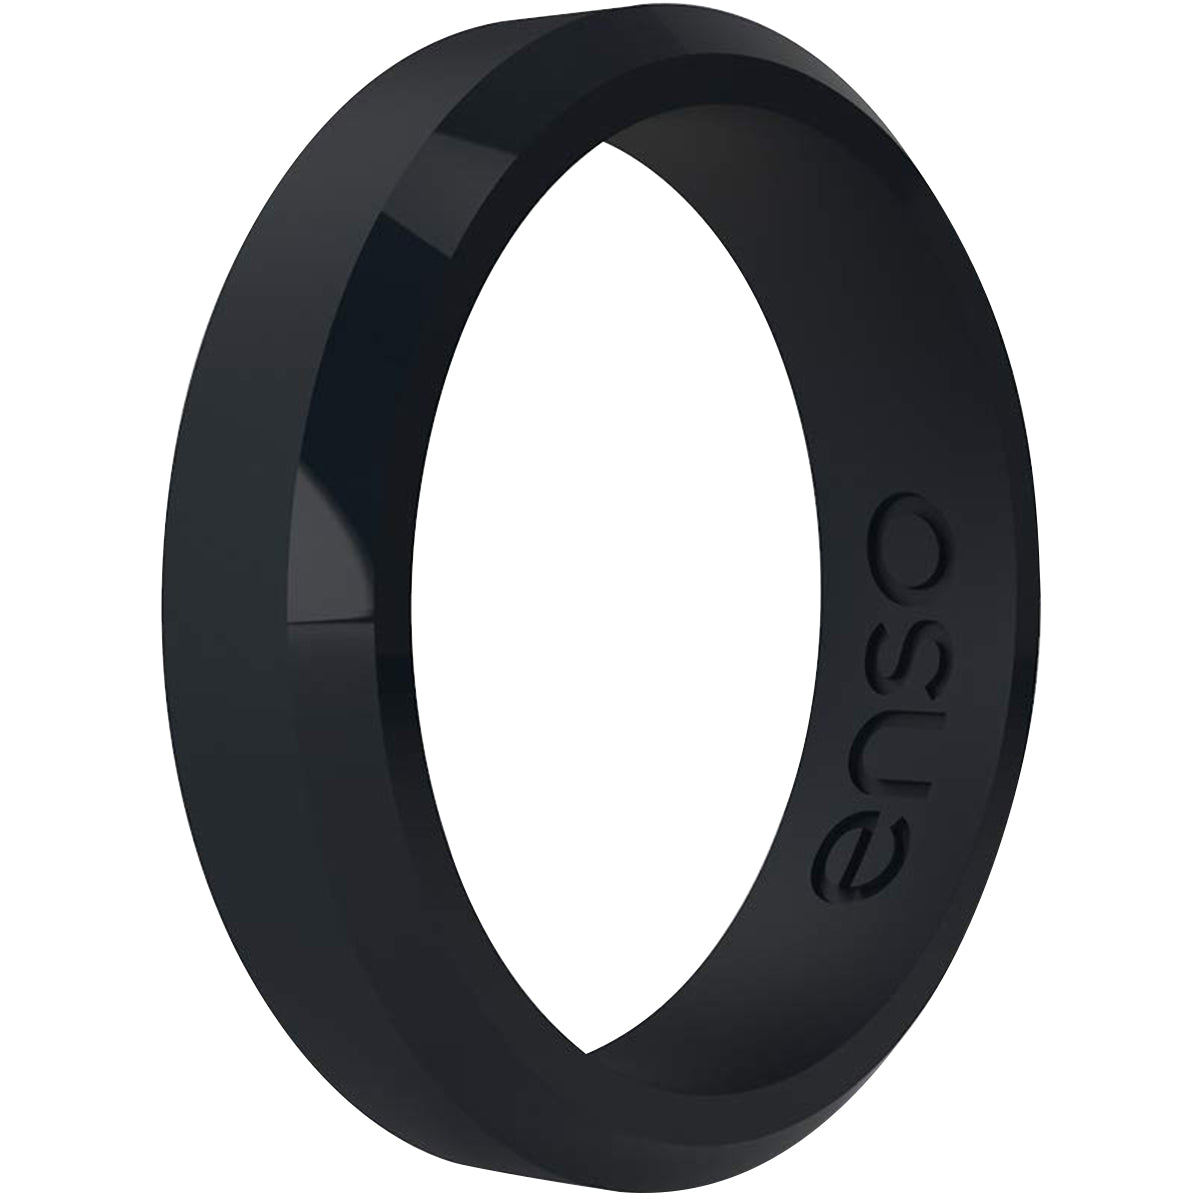 Enso Rings Thin Bevel Series Silicone Ring - Obsidian Enso Rings